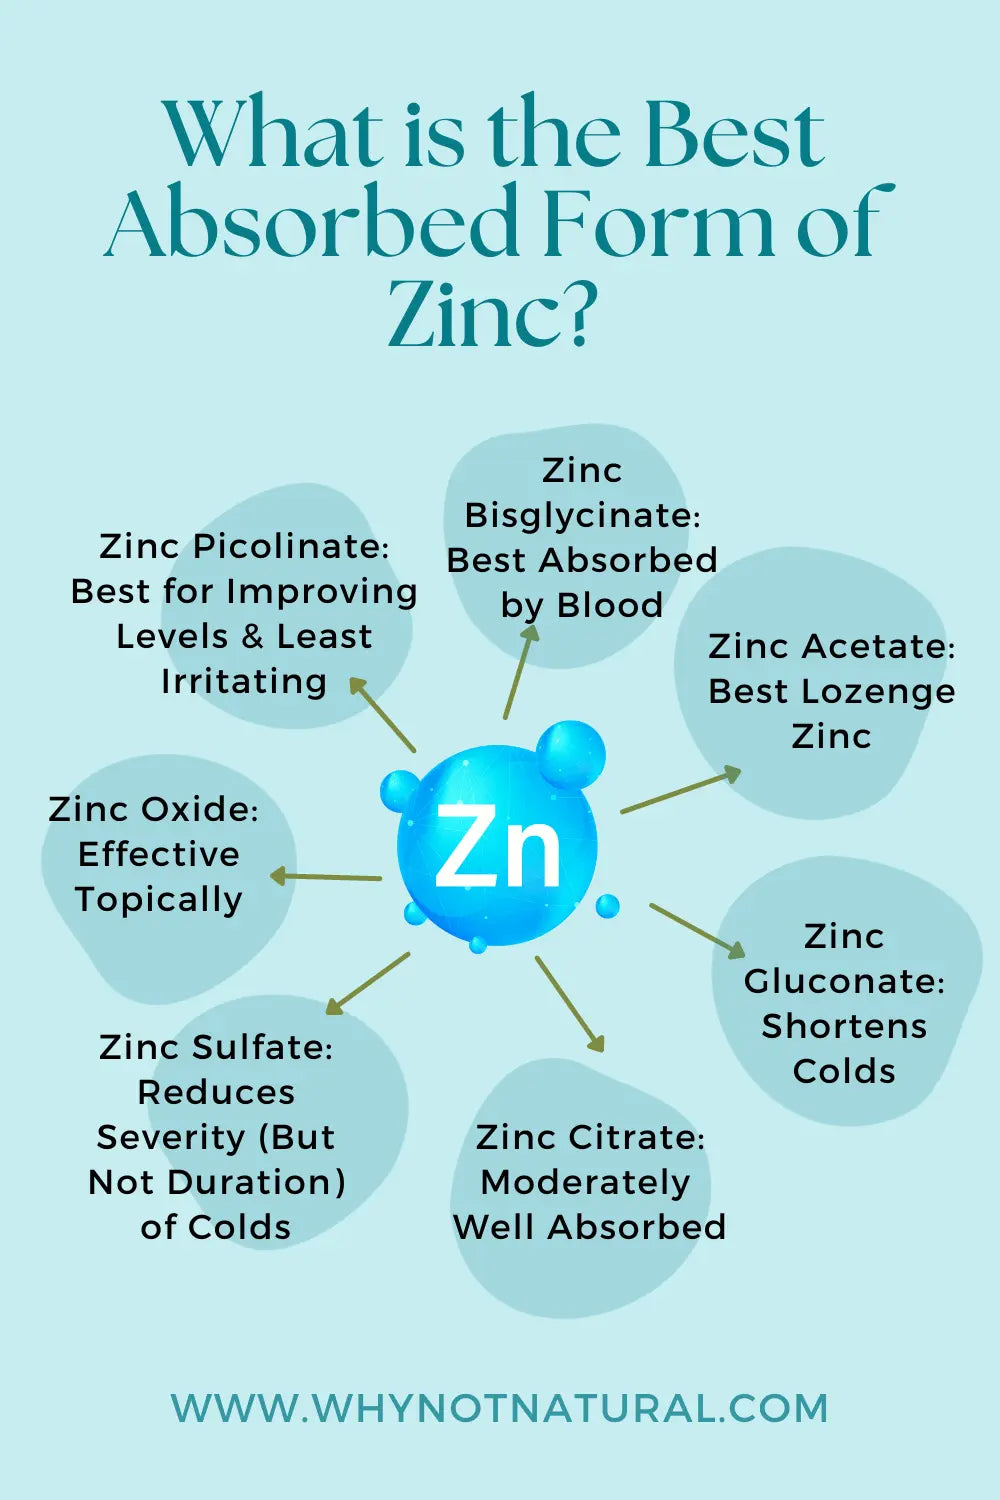 What is the Best Absorbed Form of Zinc?